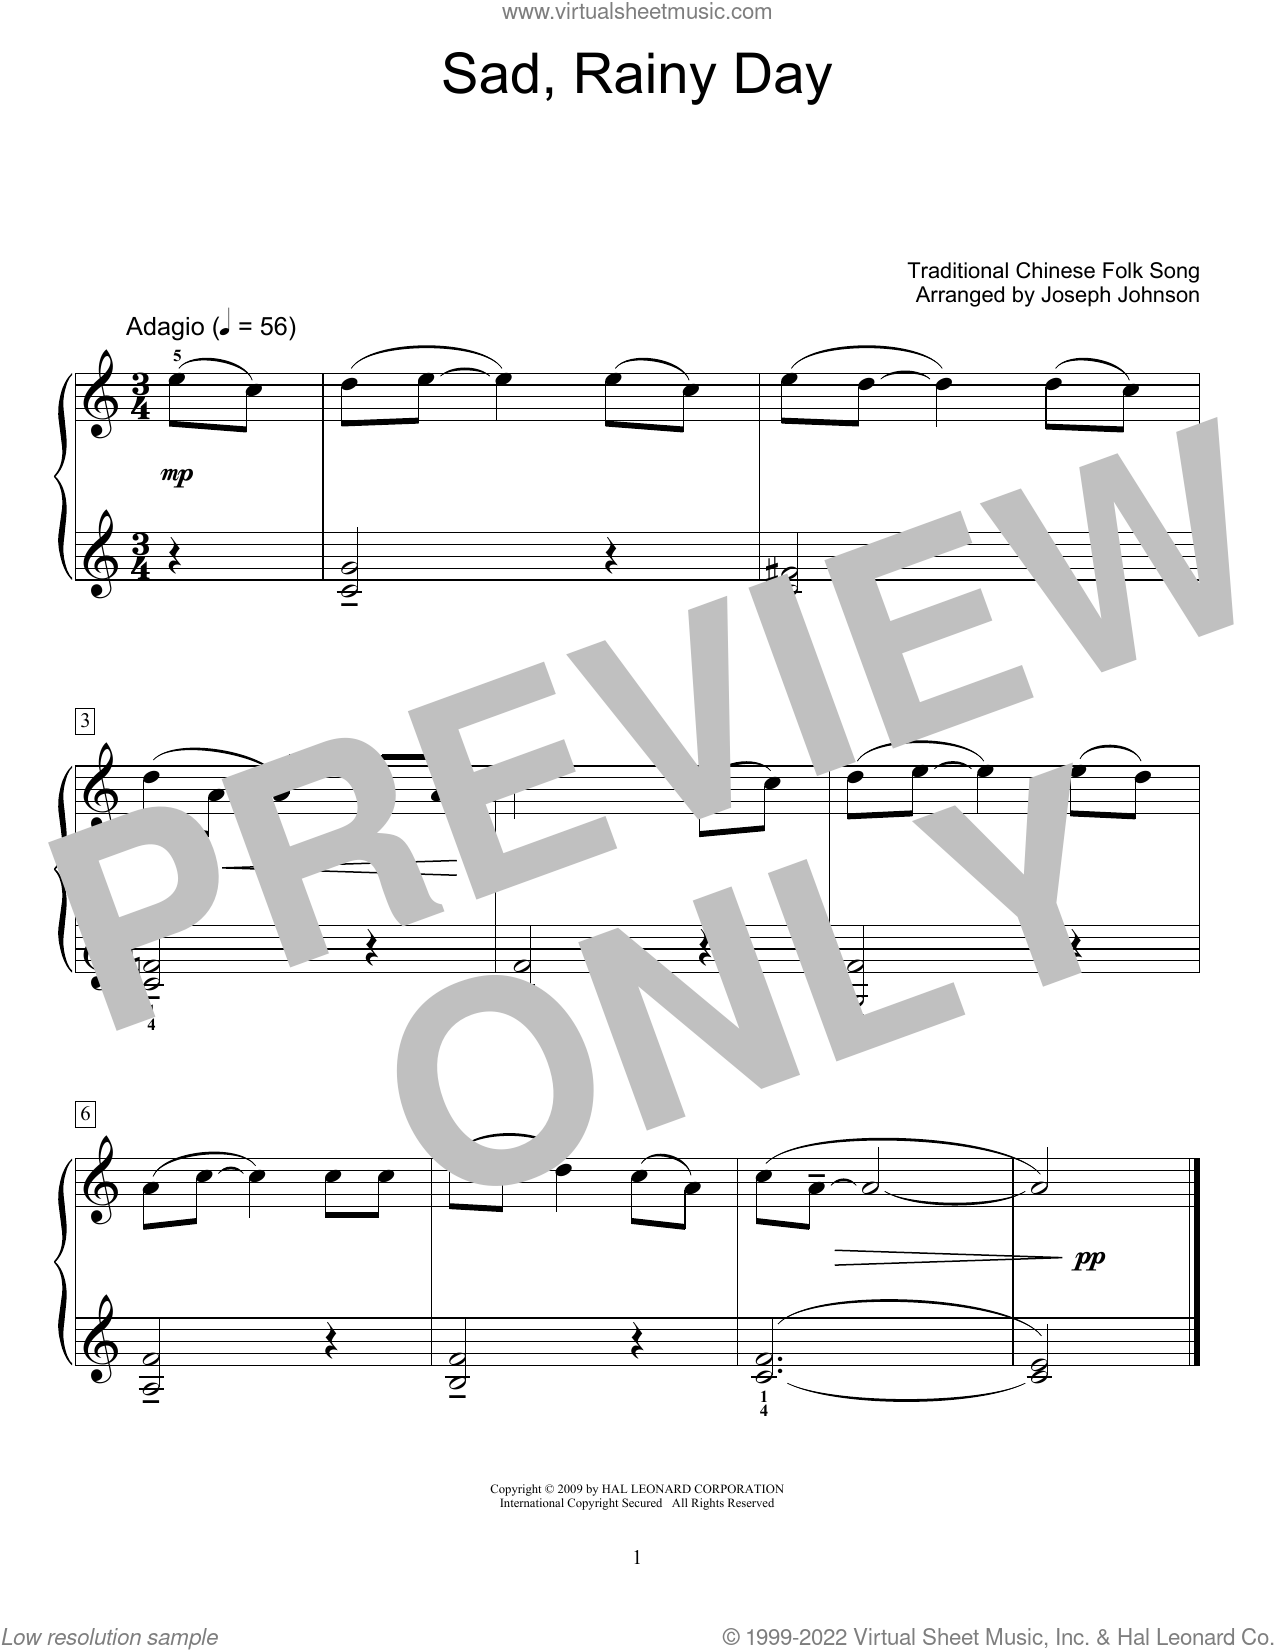 Rainy Day sheet music for voice, piano or guitar (PDF)